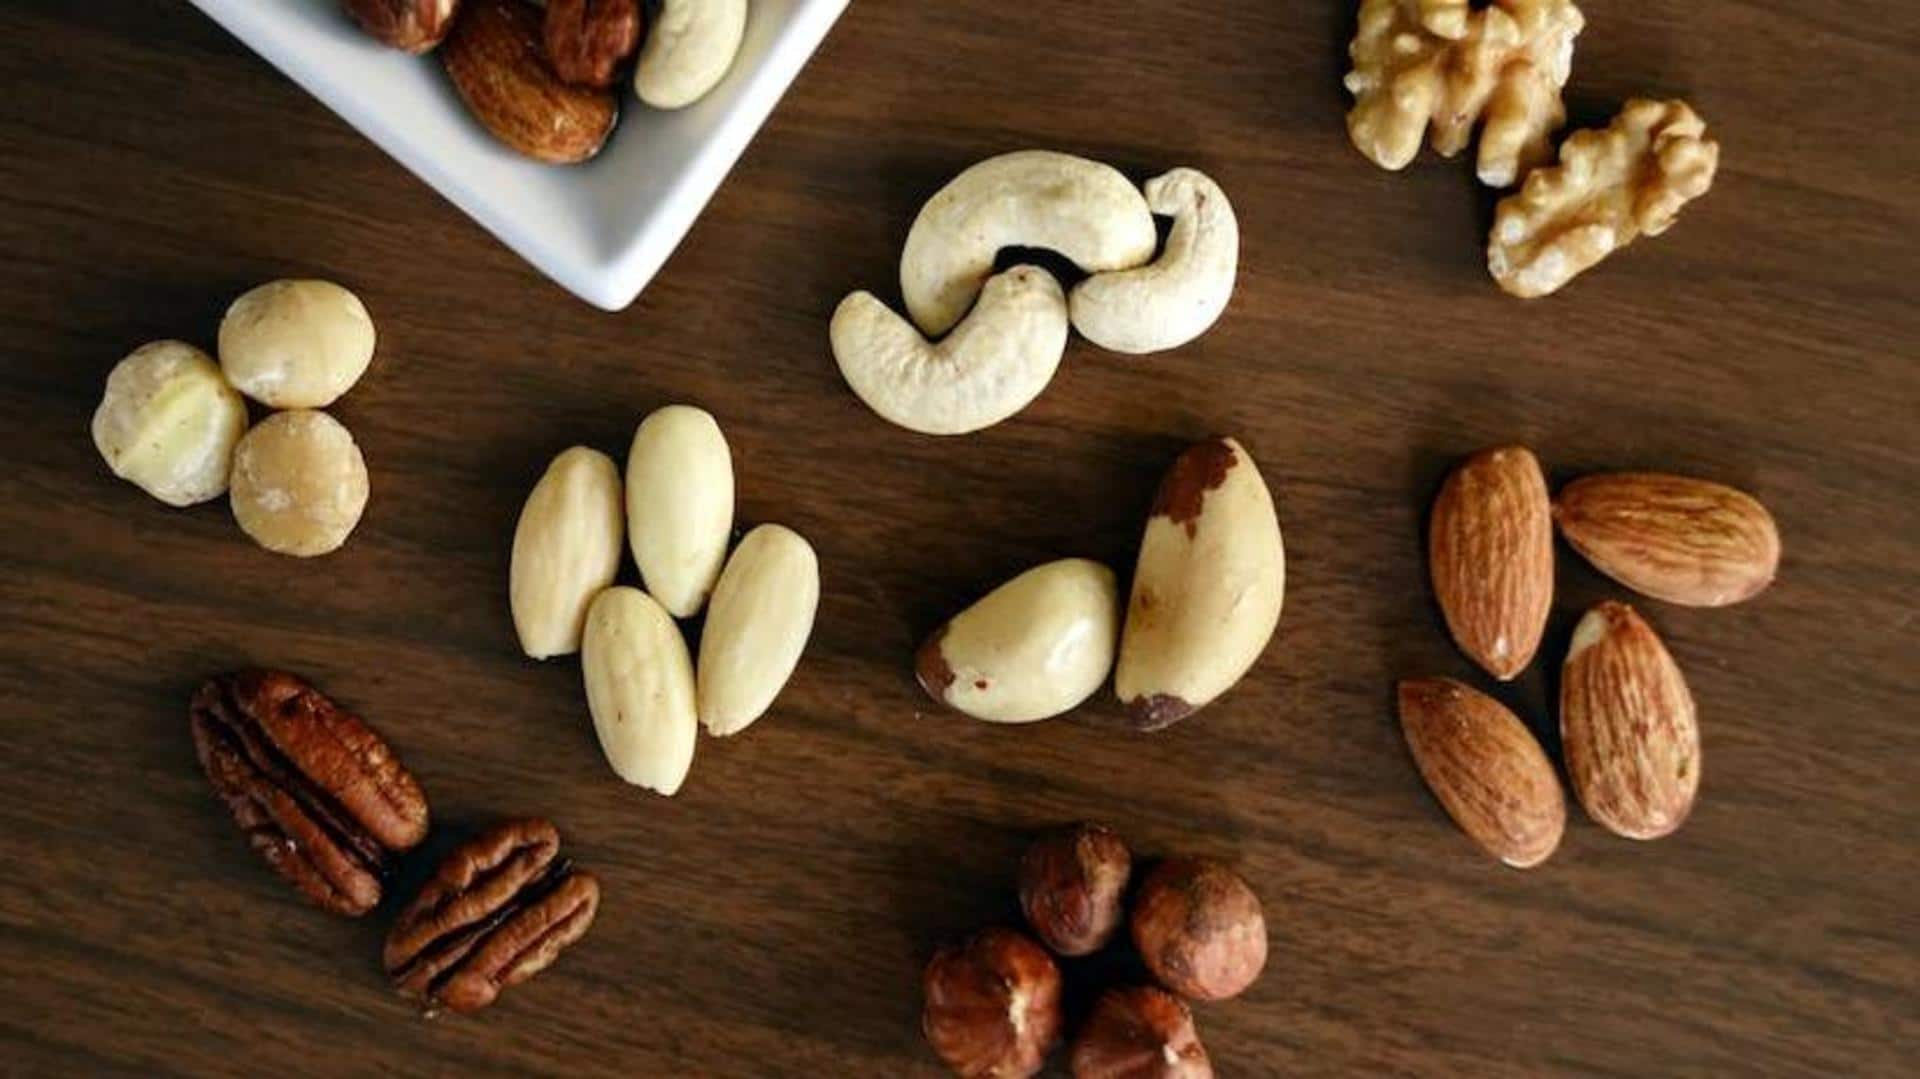 Suffering from diabetes? These nuts help manage blood sugar levels